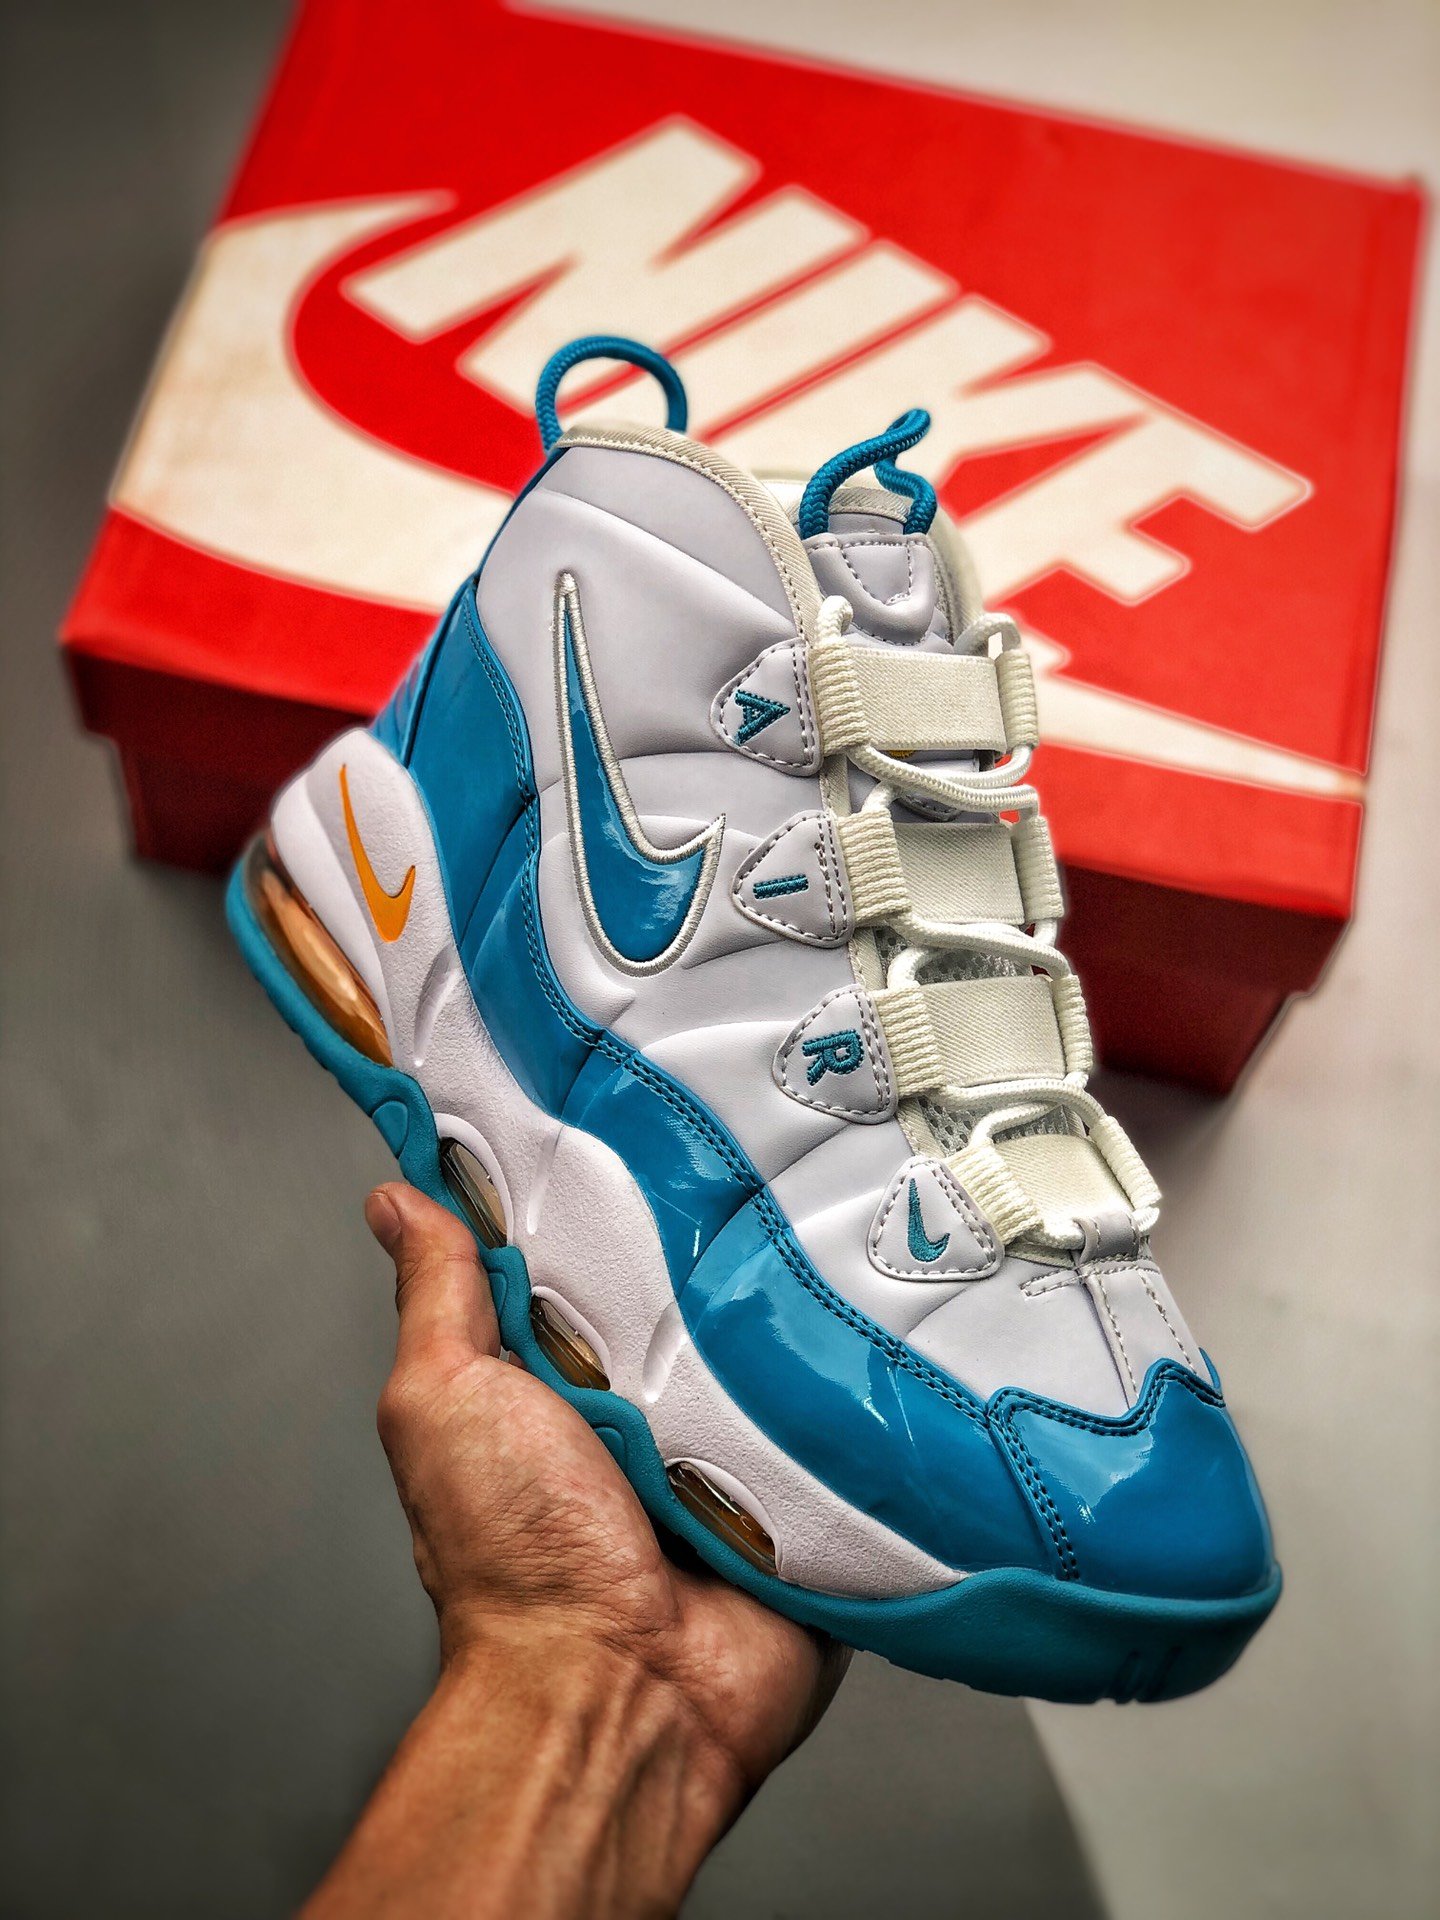 Nike Air Max Uptempo 95 "Blue Fury" Shoes